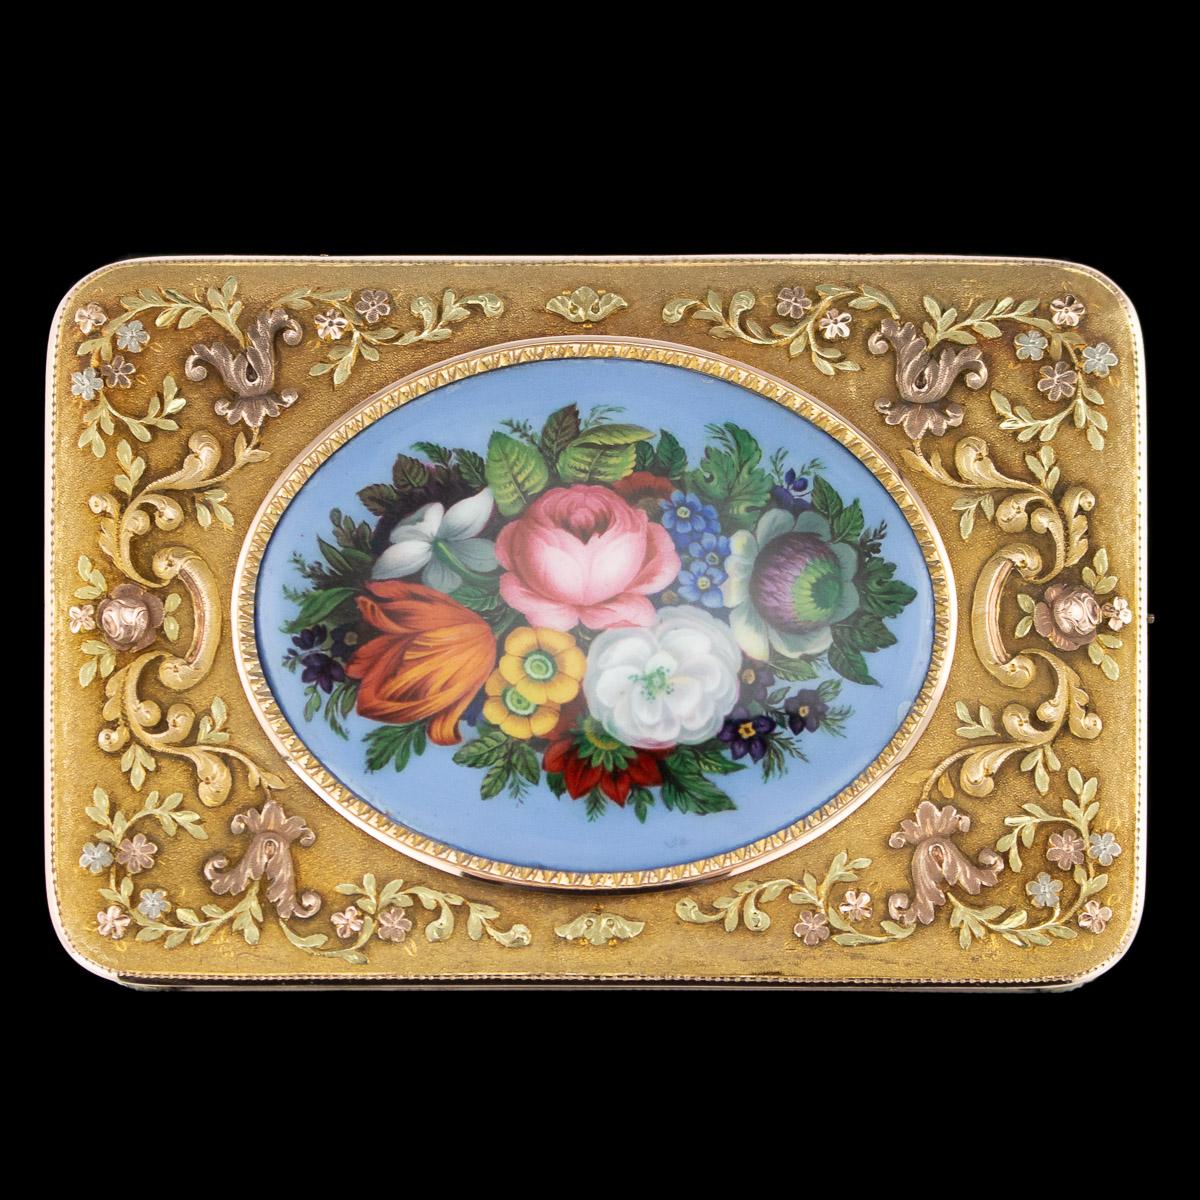 Antique mid-19th century German 18-karat gold snuff box, of traditional rectangular form, the cover applied with central enameled oval plaque depicting a bouquet of flowers, surrounded lid decorated with applied flowers in three colors of gold,